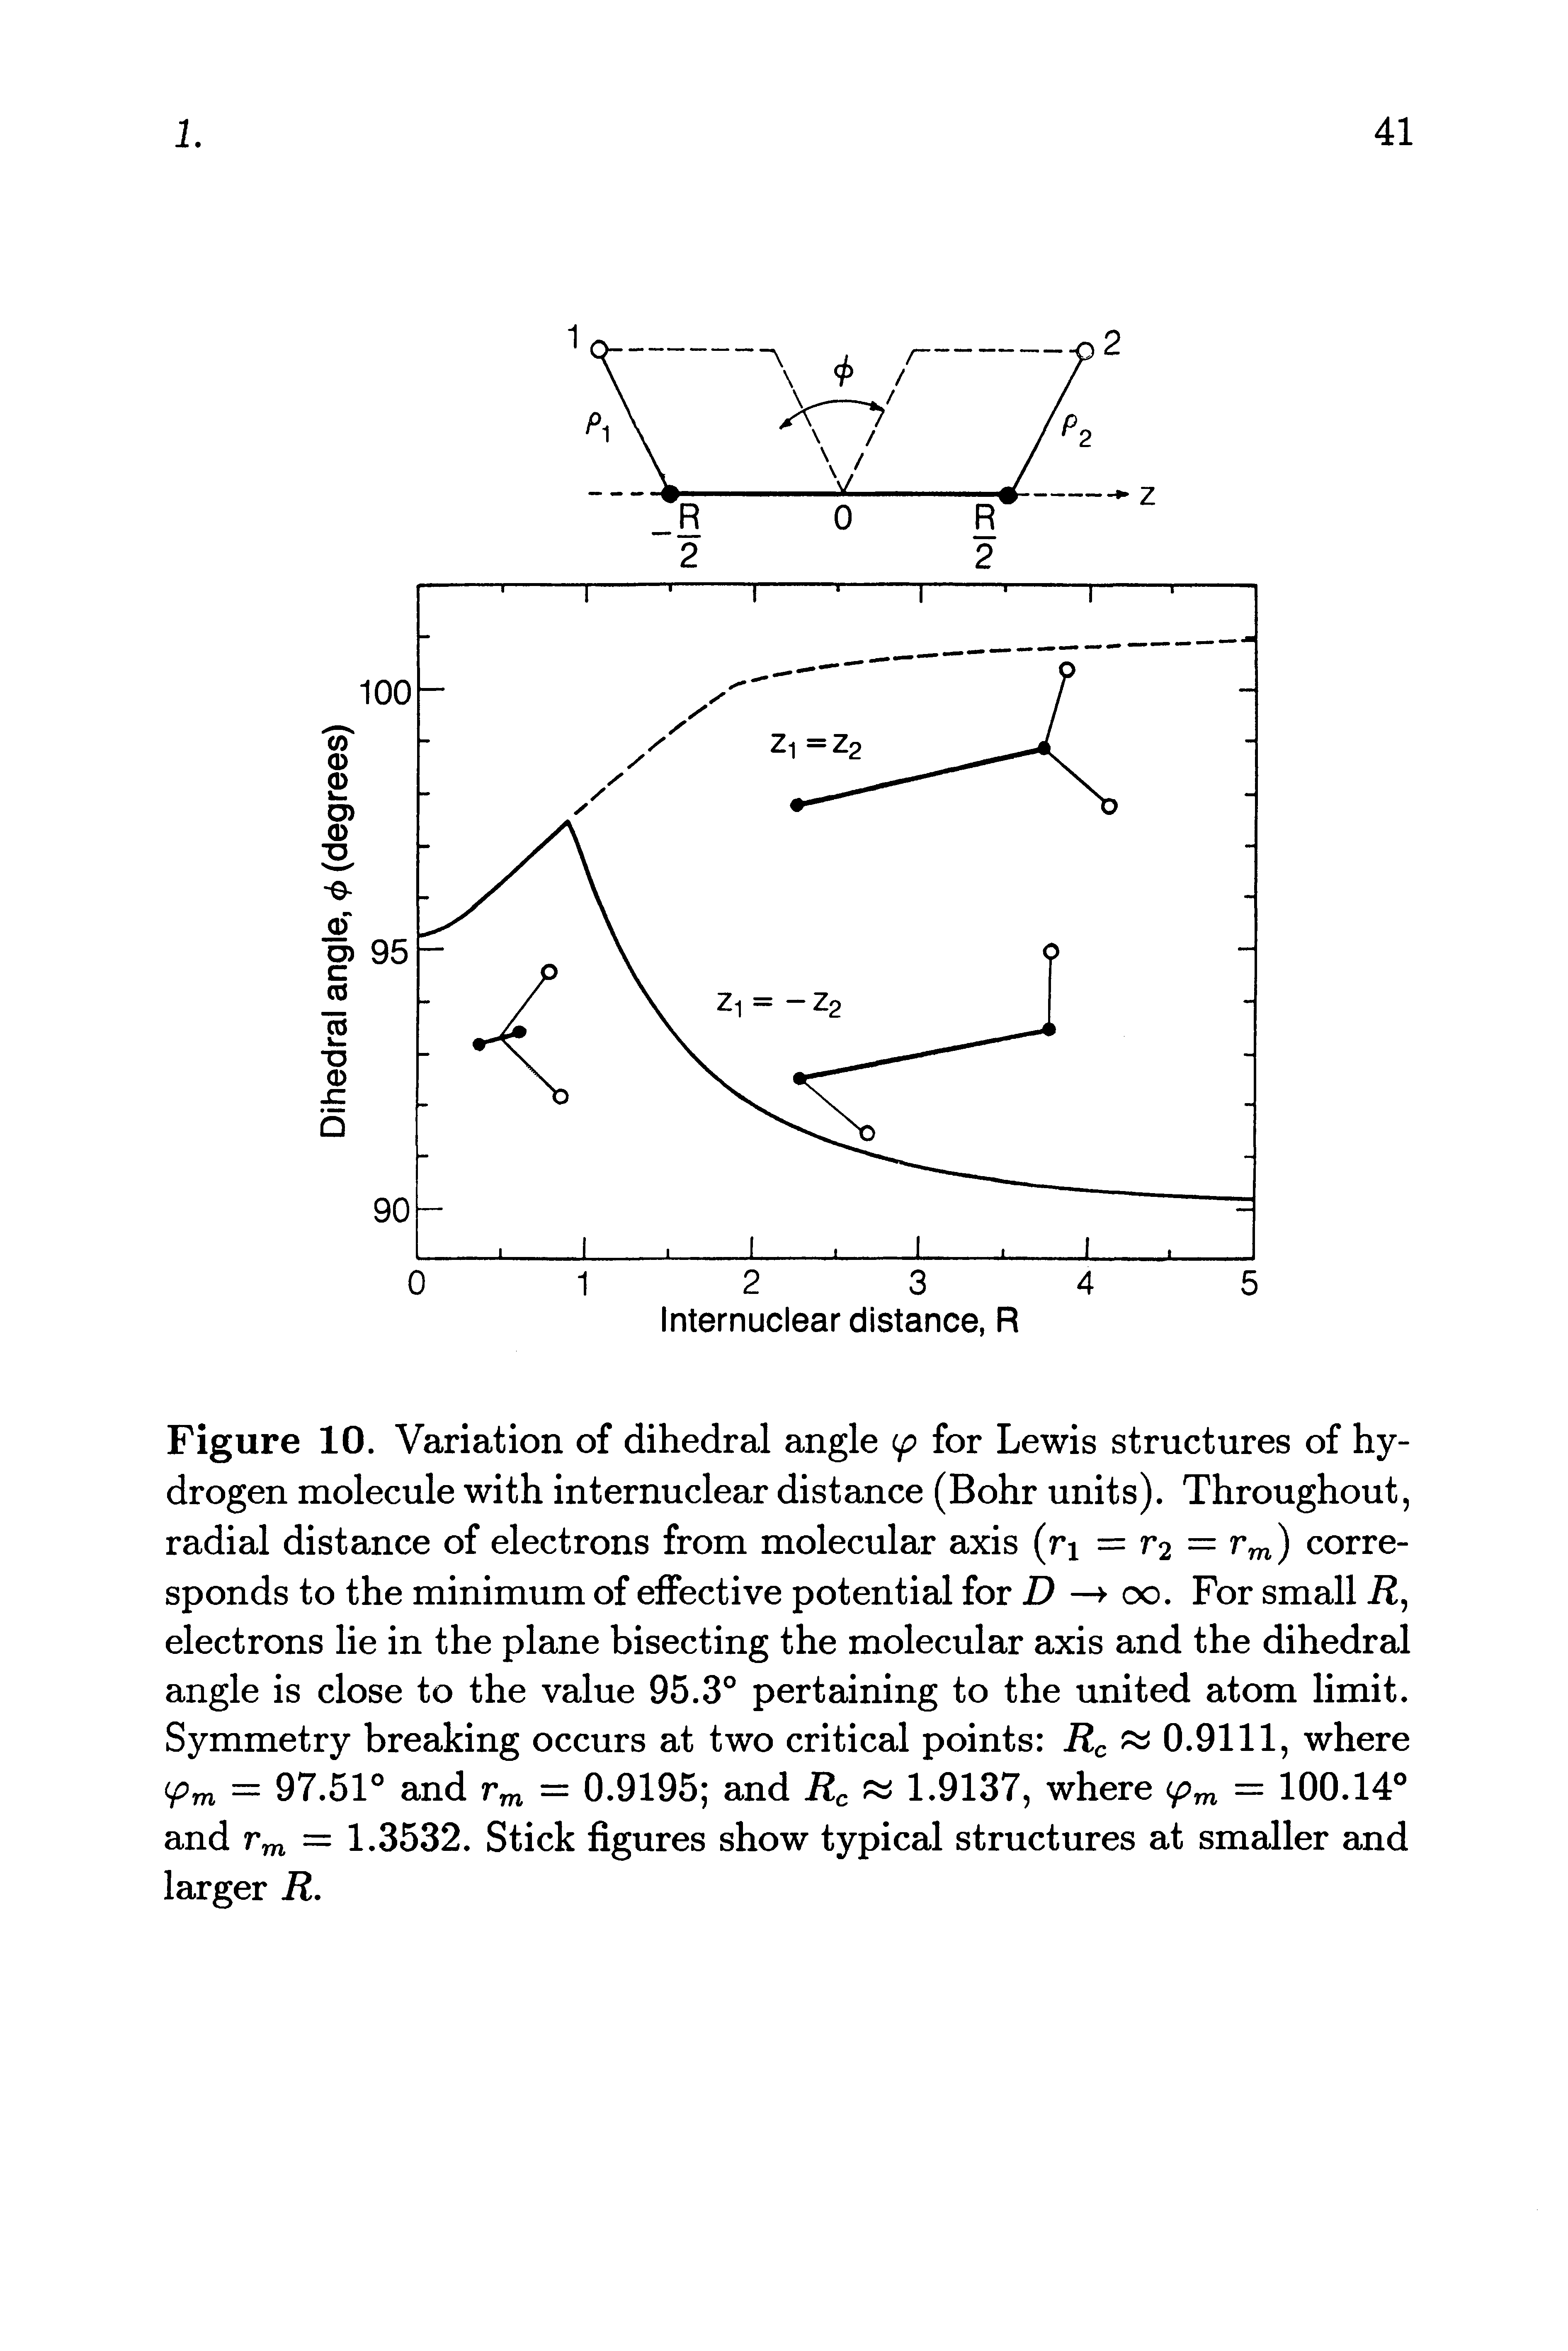 Figure 10. Variation of dihedral angle (f for Lewis structures of hydrogen molecule with internuclear distance (Bohr units). Throughout, radial distance of electrons from molecular axis (ri = V2 = Vm) corresponds to the minimum of effective potential for D oo. For small R, electrons lie in the plane bisecting the molecular axis and the dihedral angle is close to the value 95.3° pertaining to the united atom limit. Symmetry breaking occurs at two critical points i c 0.9111, where = 97.51° and = 0.9195 and Rc 1.9137, where (fm = 100.14° and r n = 1.3532. Stick figures show typical structures at smaller and larger R.